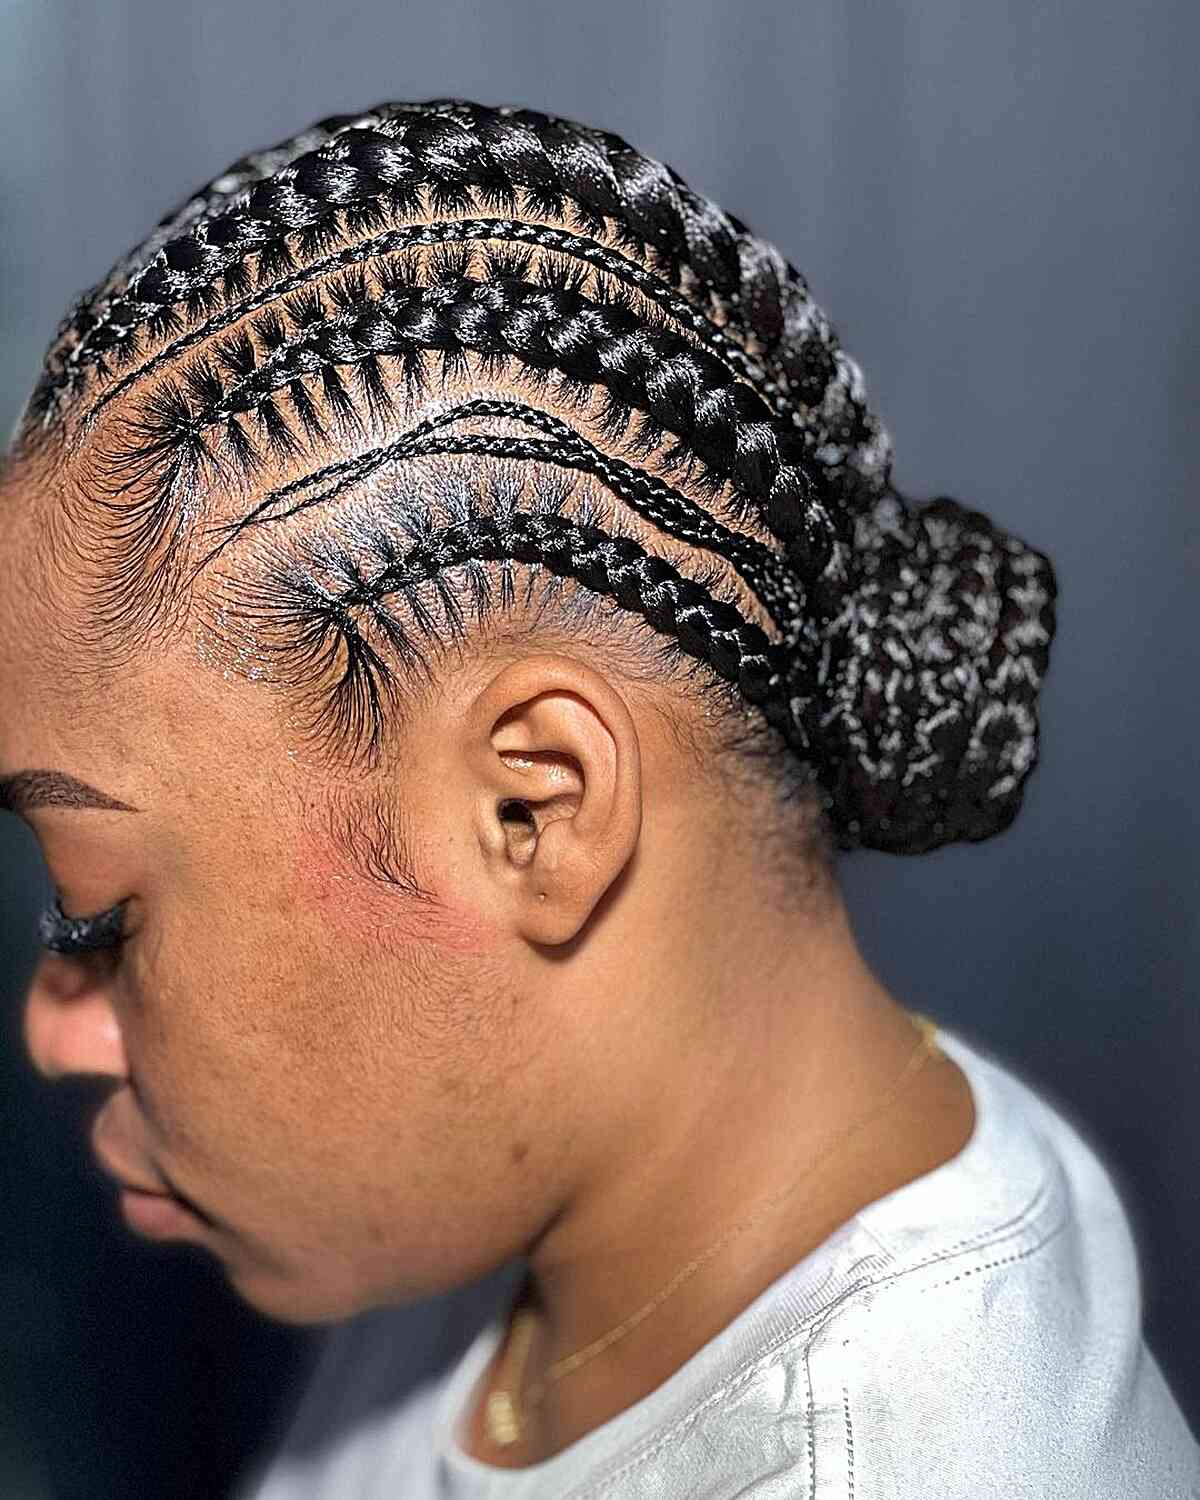 Volleyball Inspired Cornrow Braids with Low Bun for Black Women